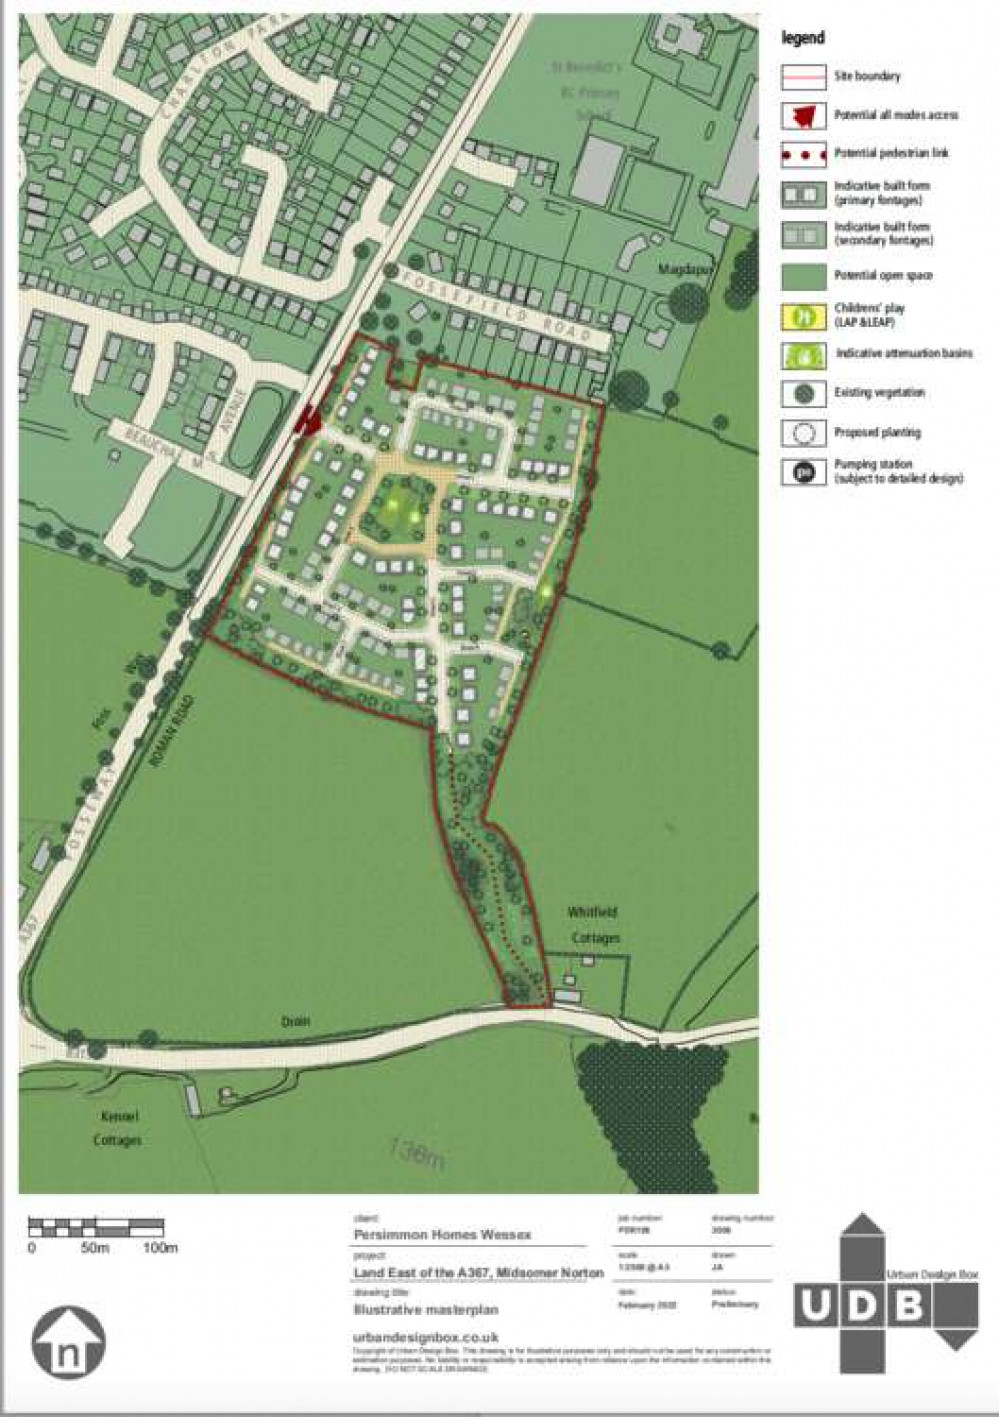 An illustrative layout of the proposed development near Stratton. Image taken from the planning application